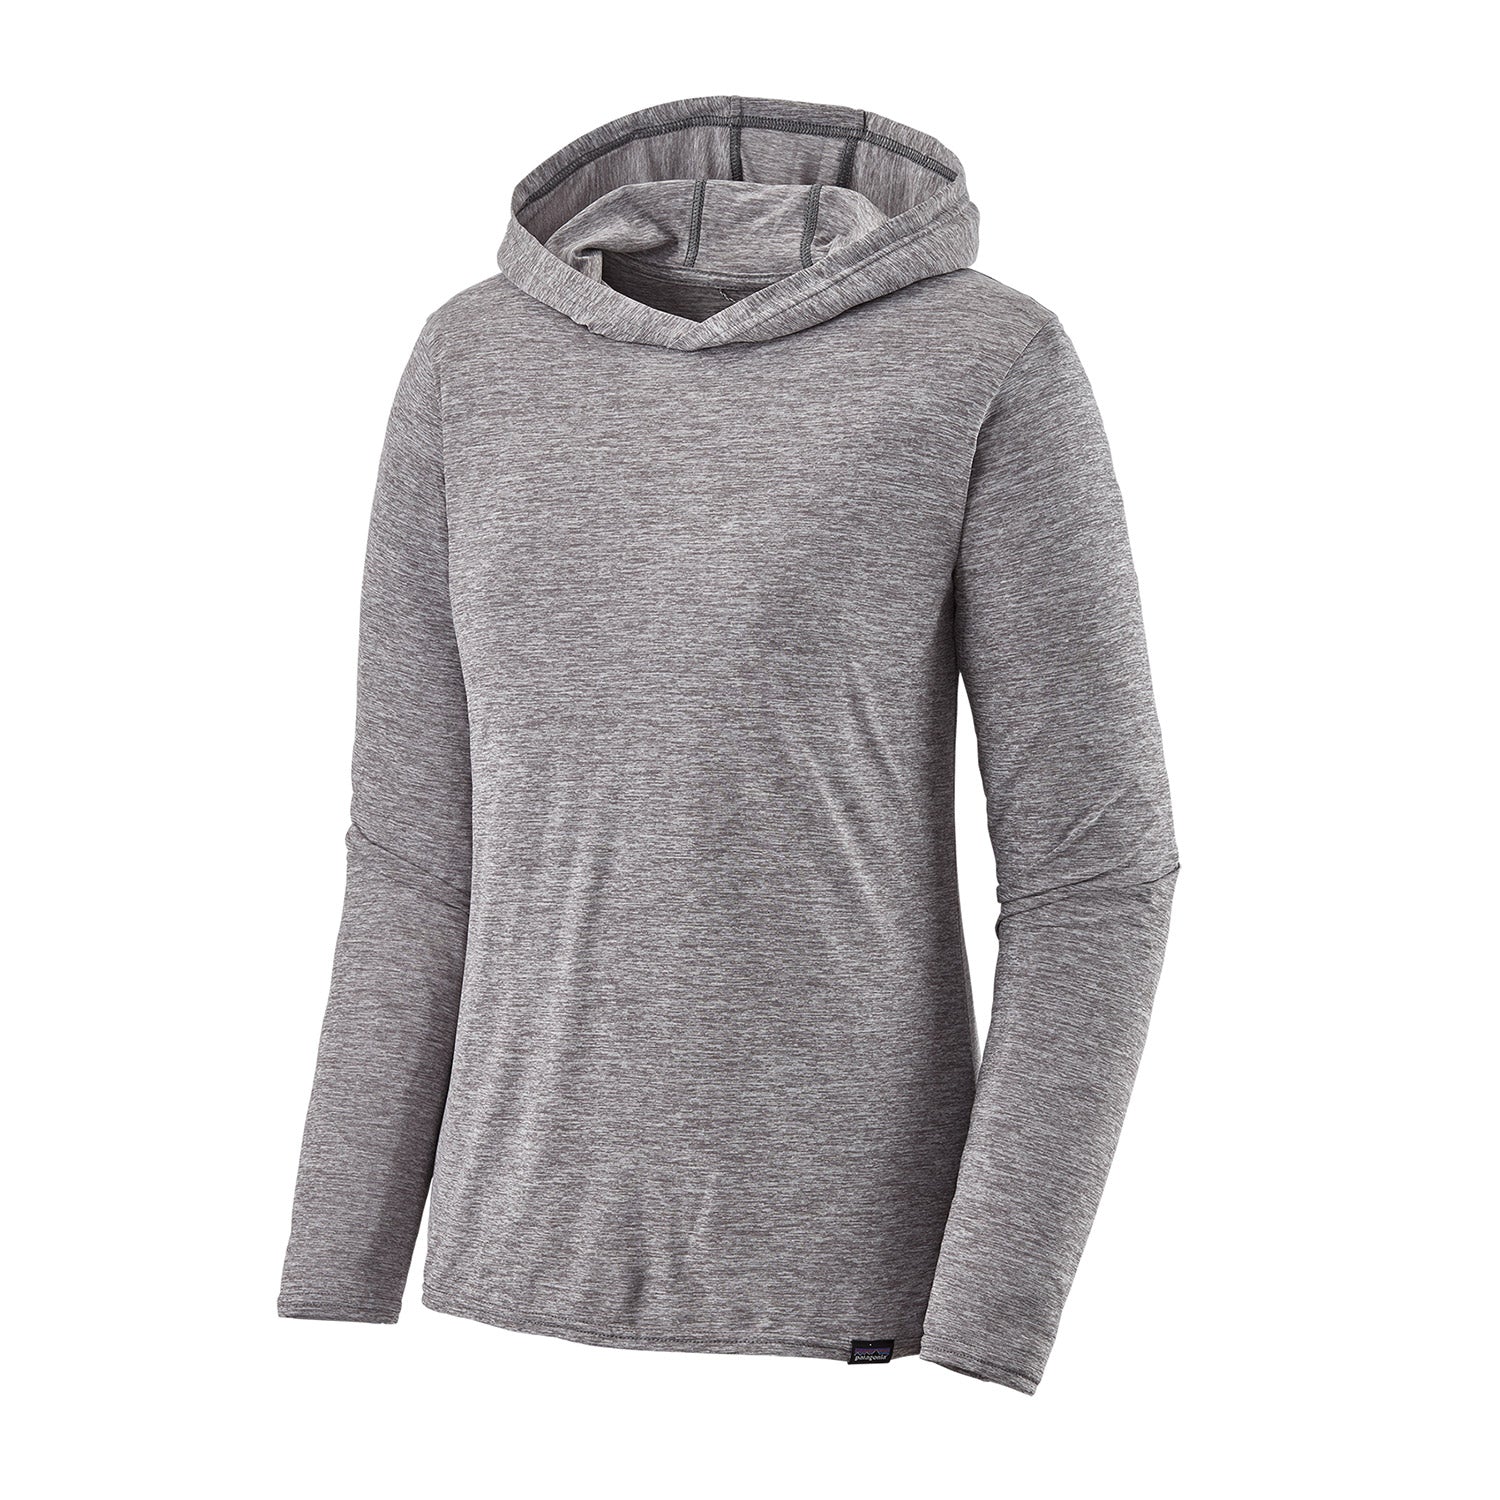 patagonia women's capilene cool daily hoody in feather grey